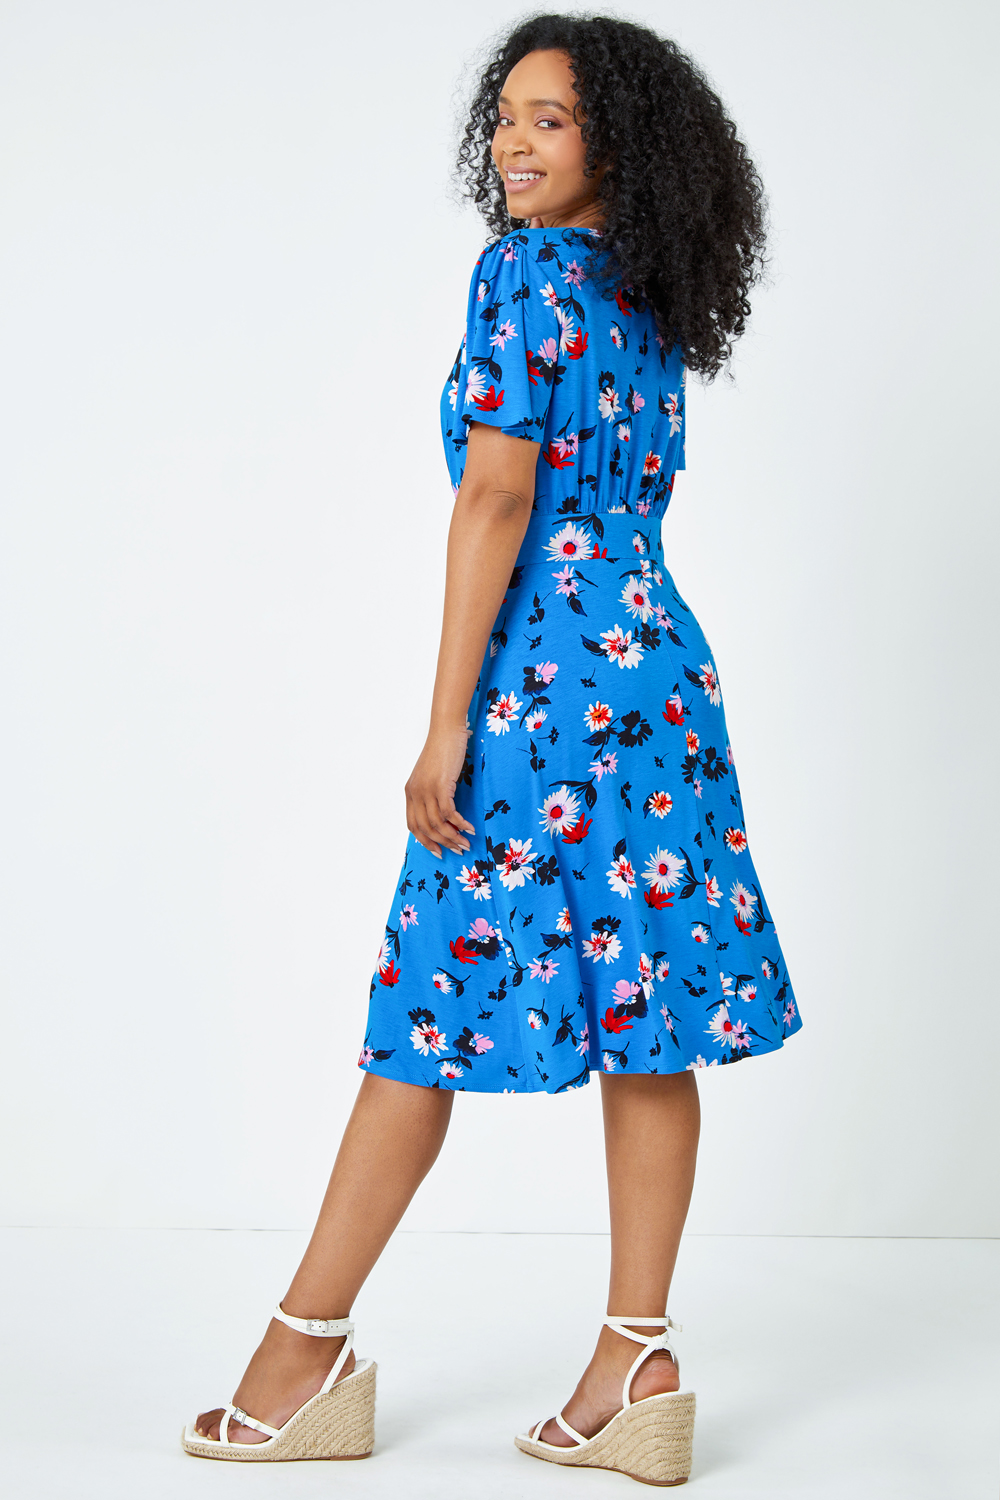 Turquoise Petite Floral Print Stretch Dress, Image 3 of 5